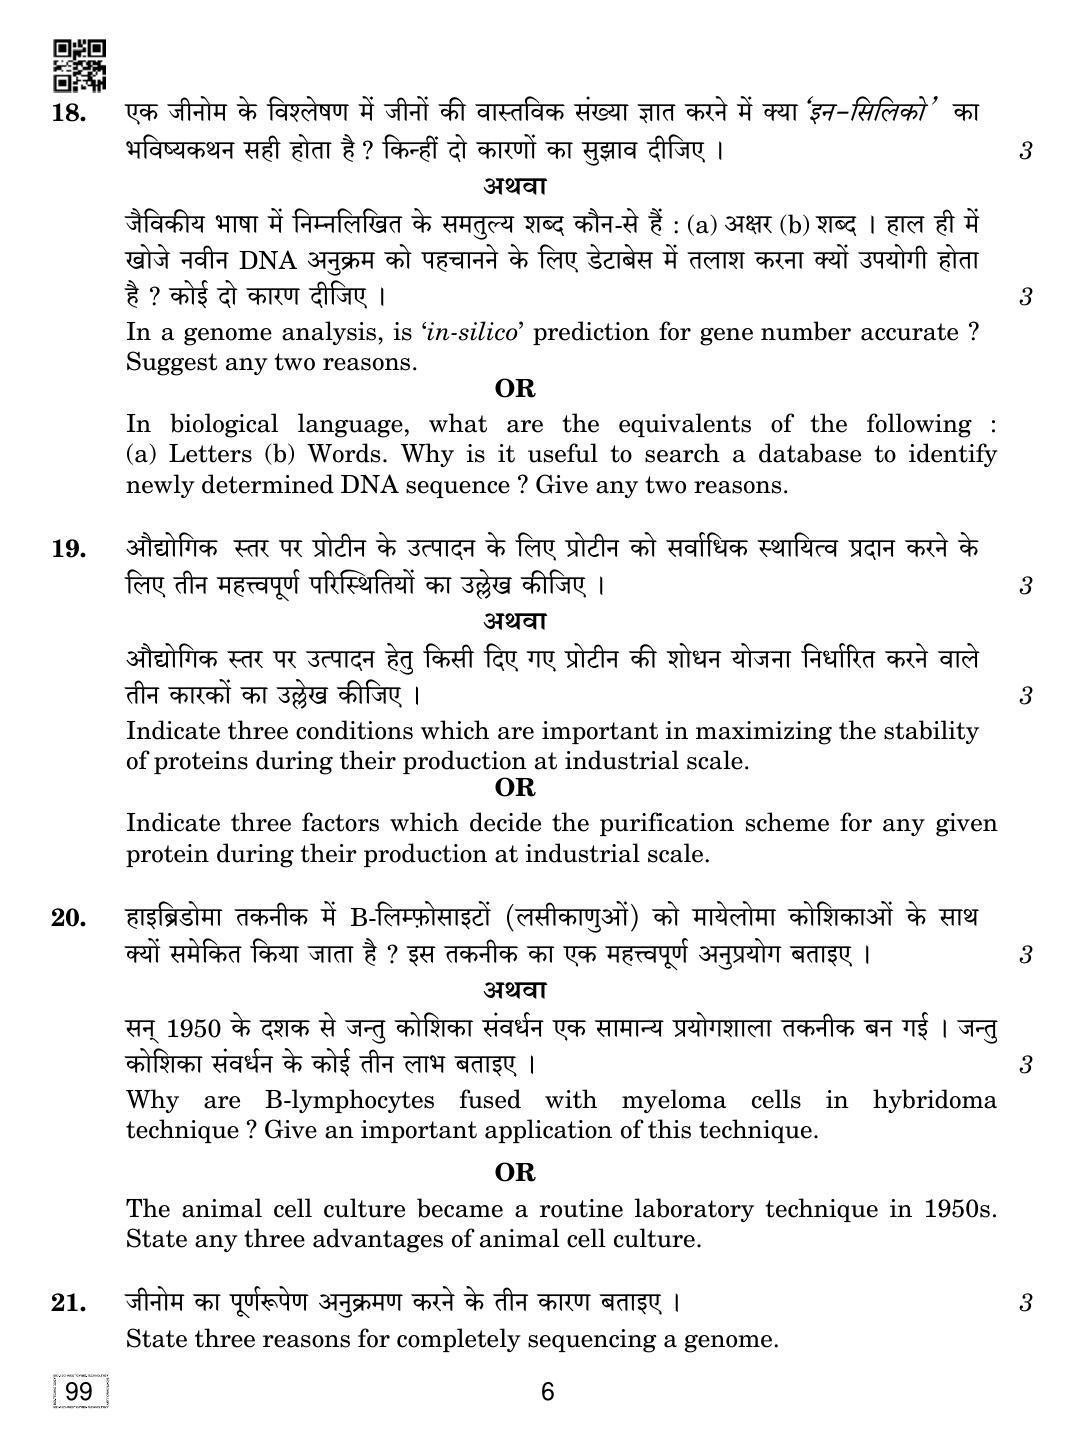 CBSE Class 12 99 BIOTECHNOLOGY 2019 Compartment Question Paper - Page 6